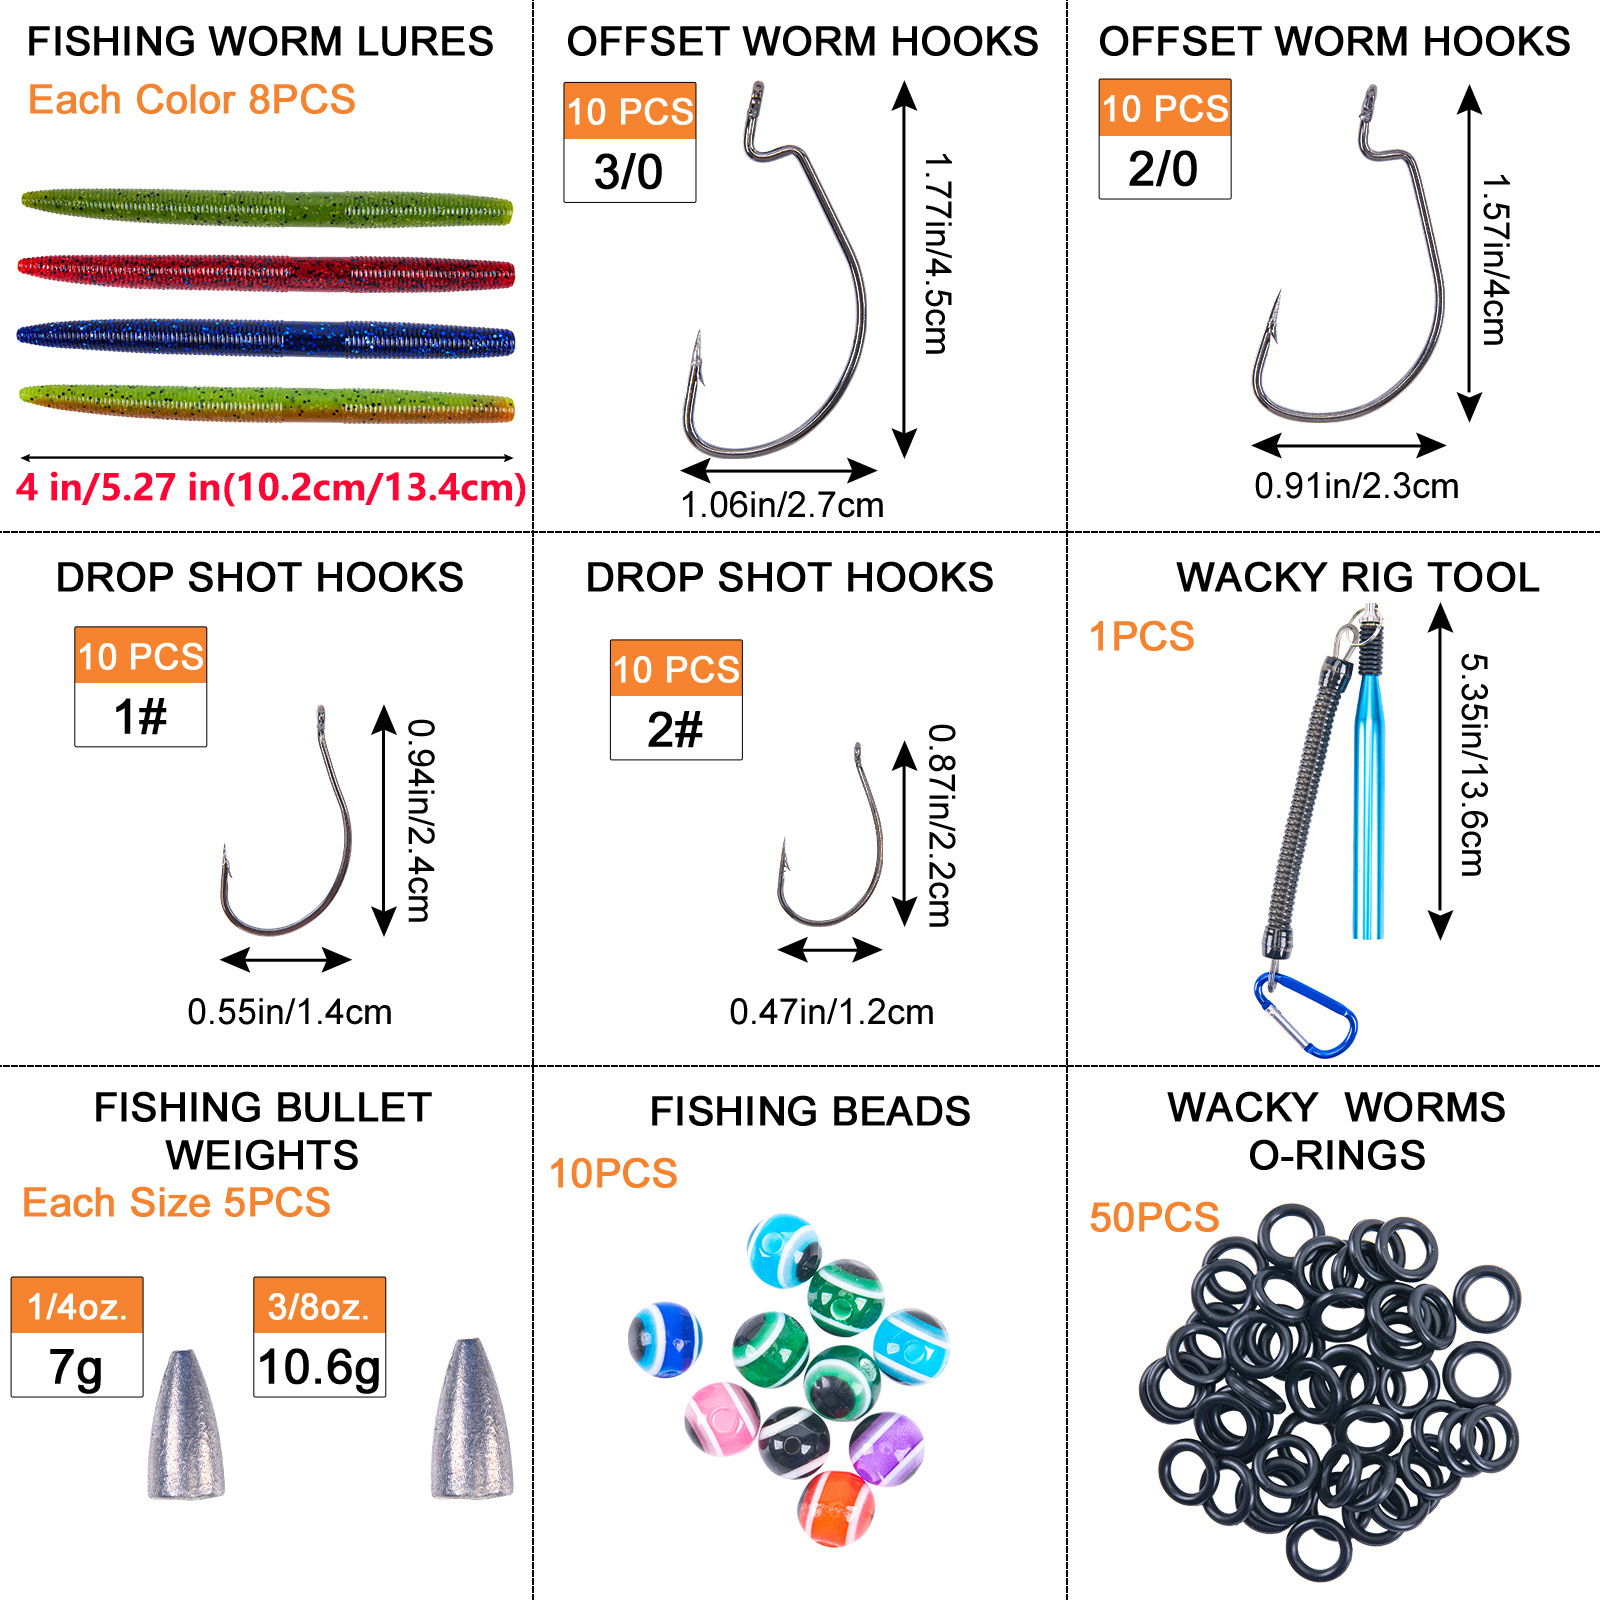 Hetto Wacky Worms Kit Wacky Rig Tool Wacky O-Rings Senko Soft Baits(5.5),  3 Size Fishing Hooks for Bass colorful: Buy Online at Best Price in UAE 